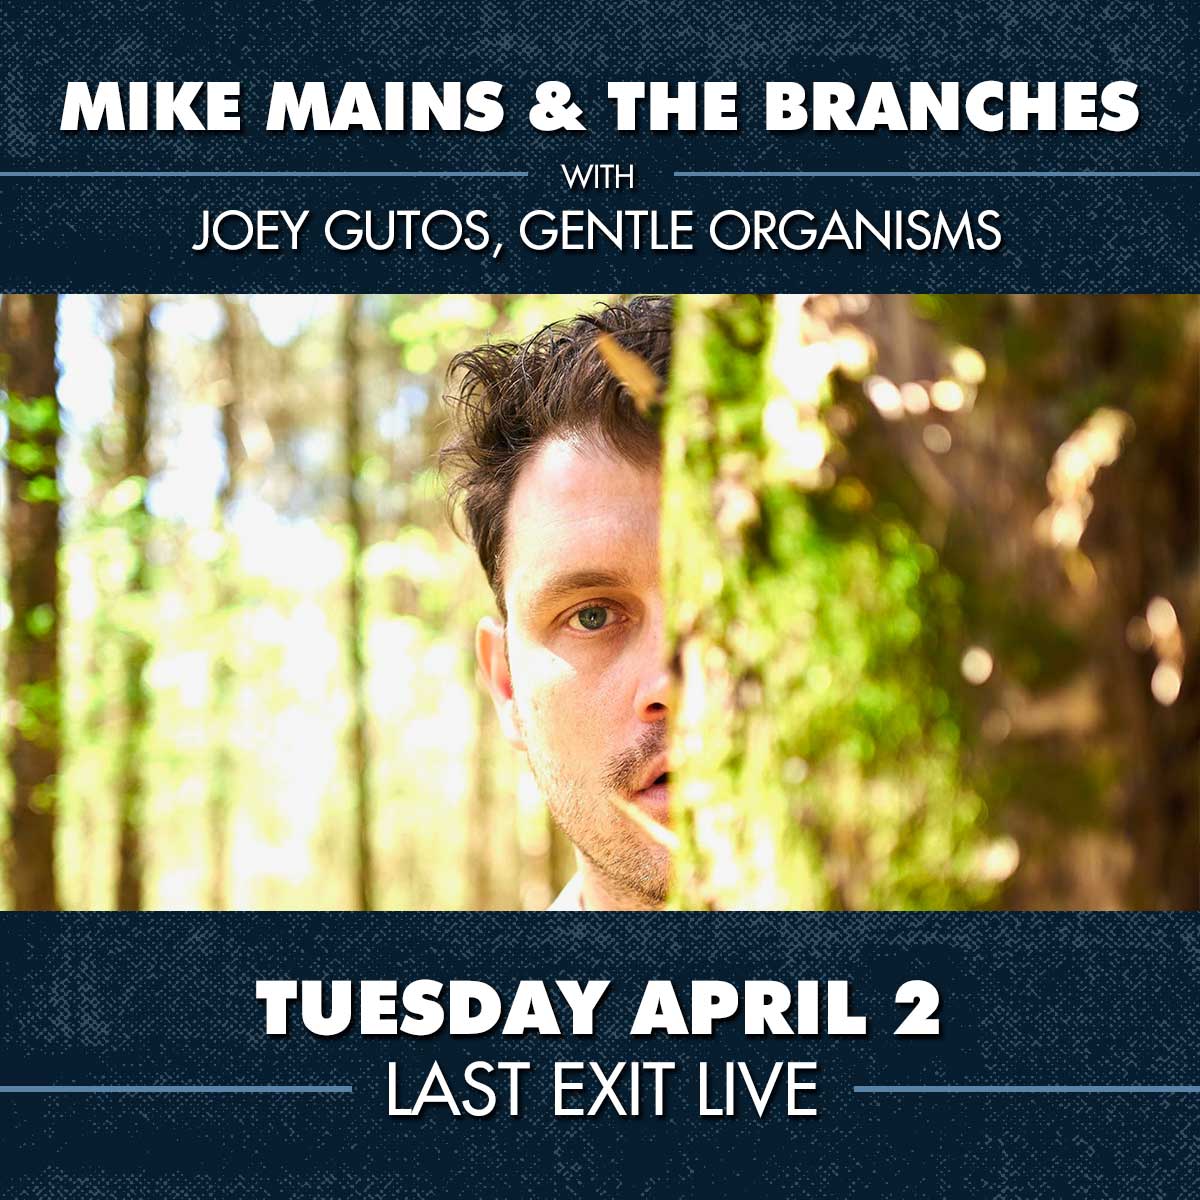 MIKE MAINS & THE BRANCHES